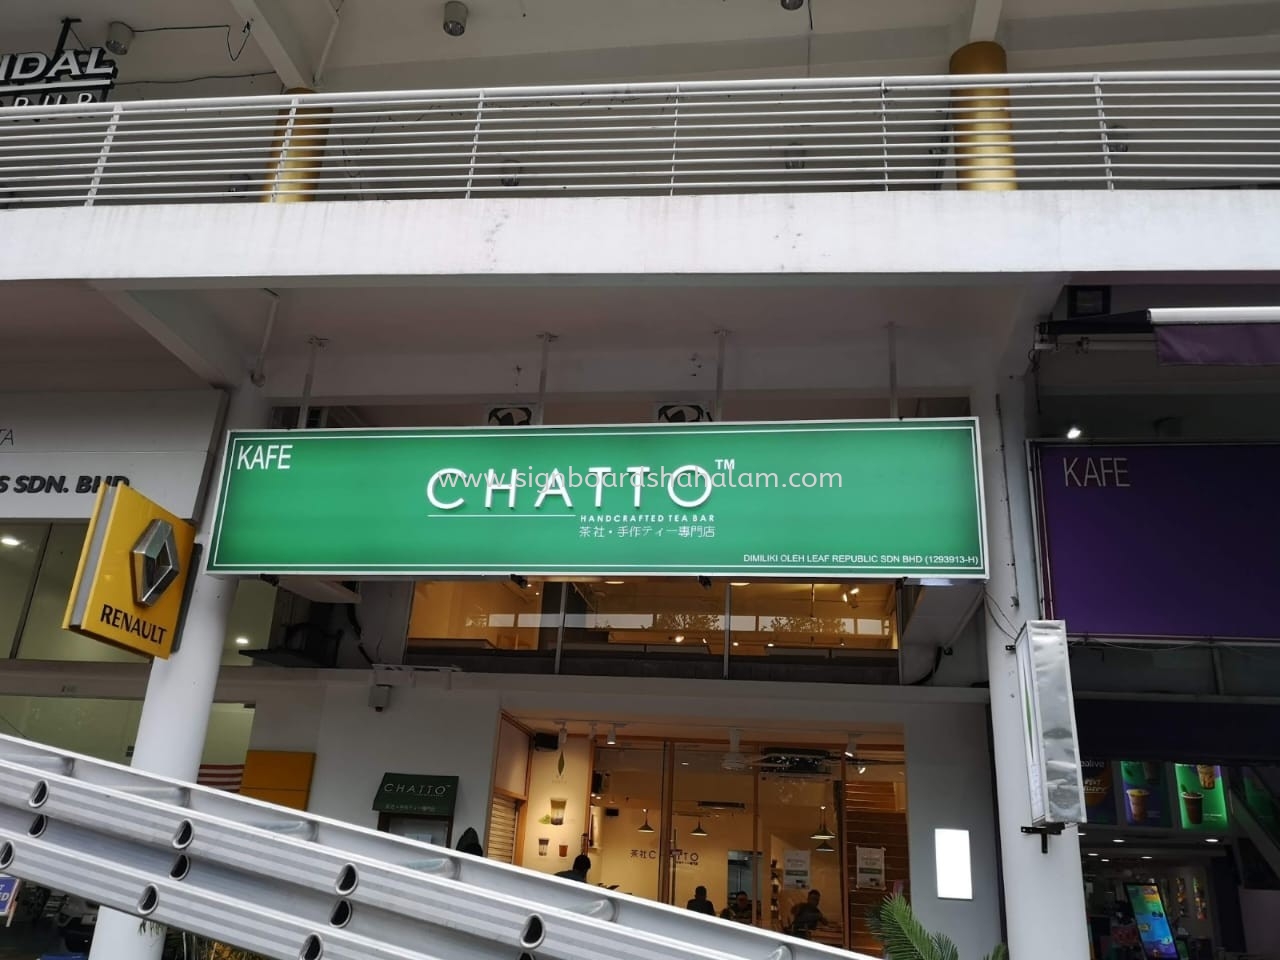 CHATTO LIGHTBOX SIGNBOARD WITH 3D LED FRONTLIT SIGNAGE 